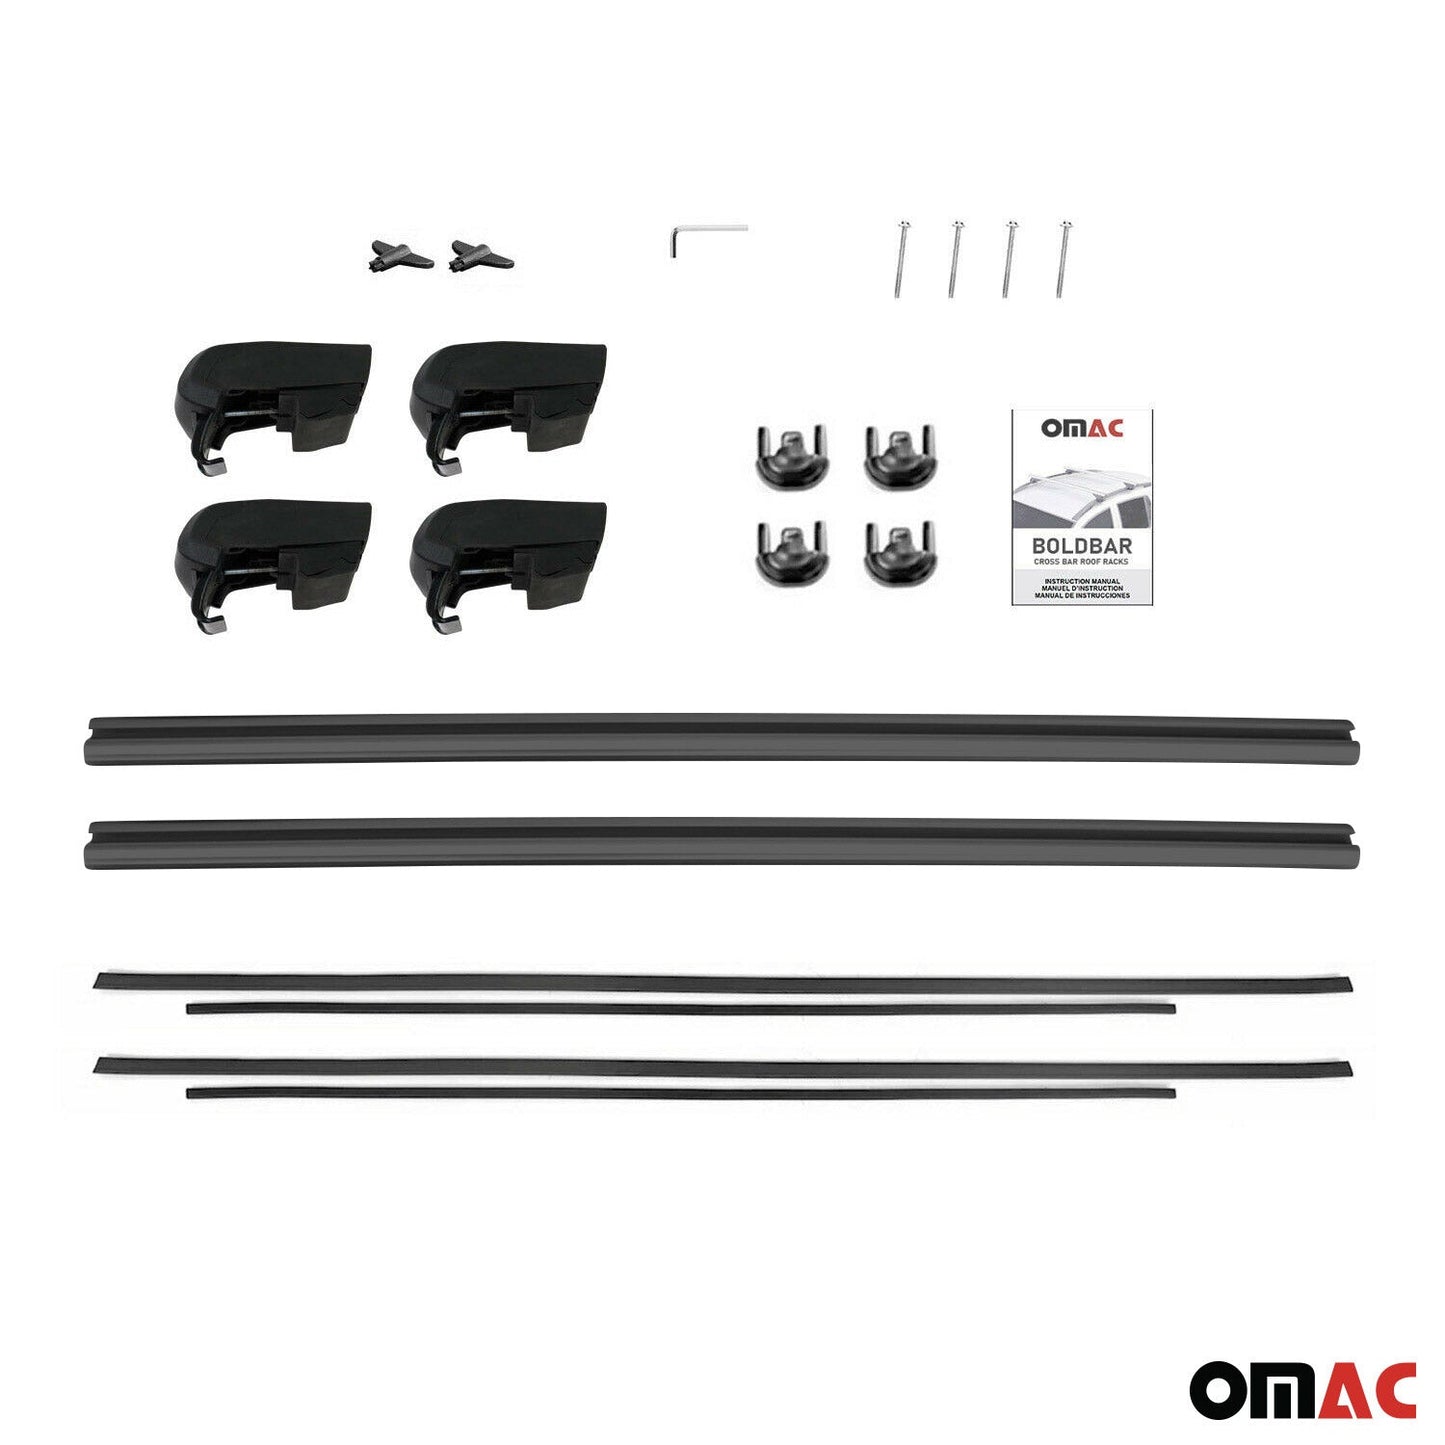 OMAC Lockable Roof Rack Cross Bars Luggage Carrier for Cadillac XT4 2019-2024 Black G003002